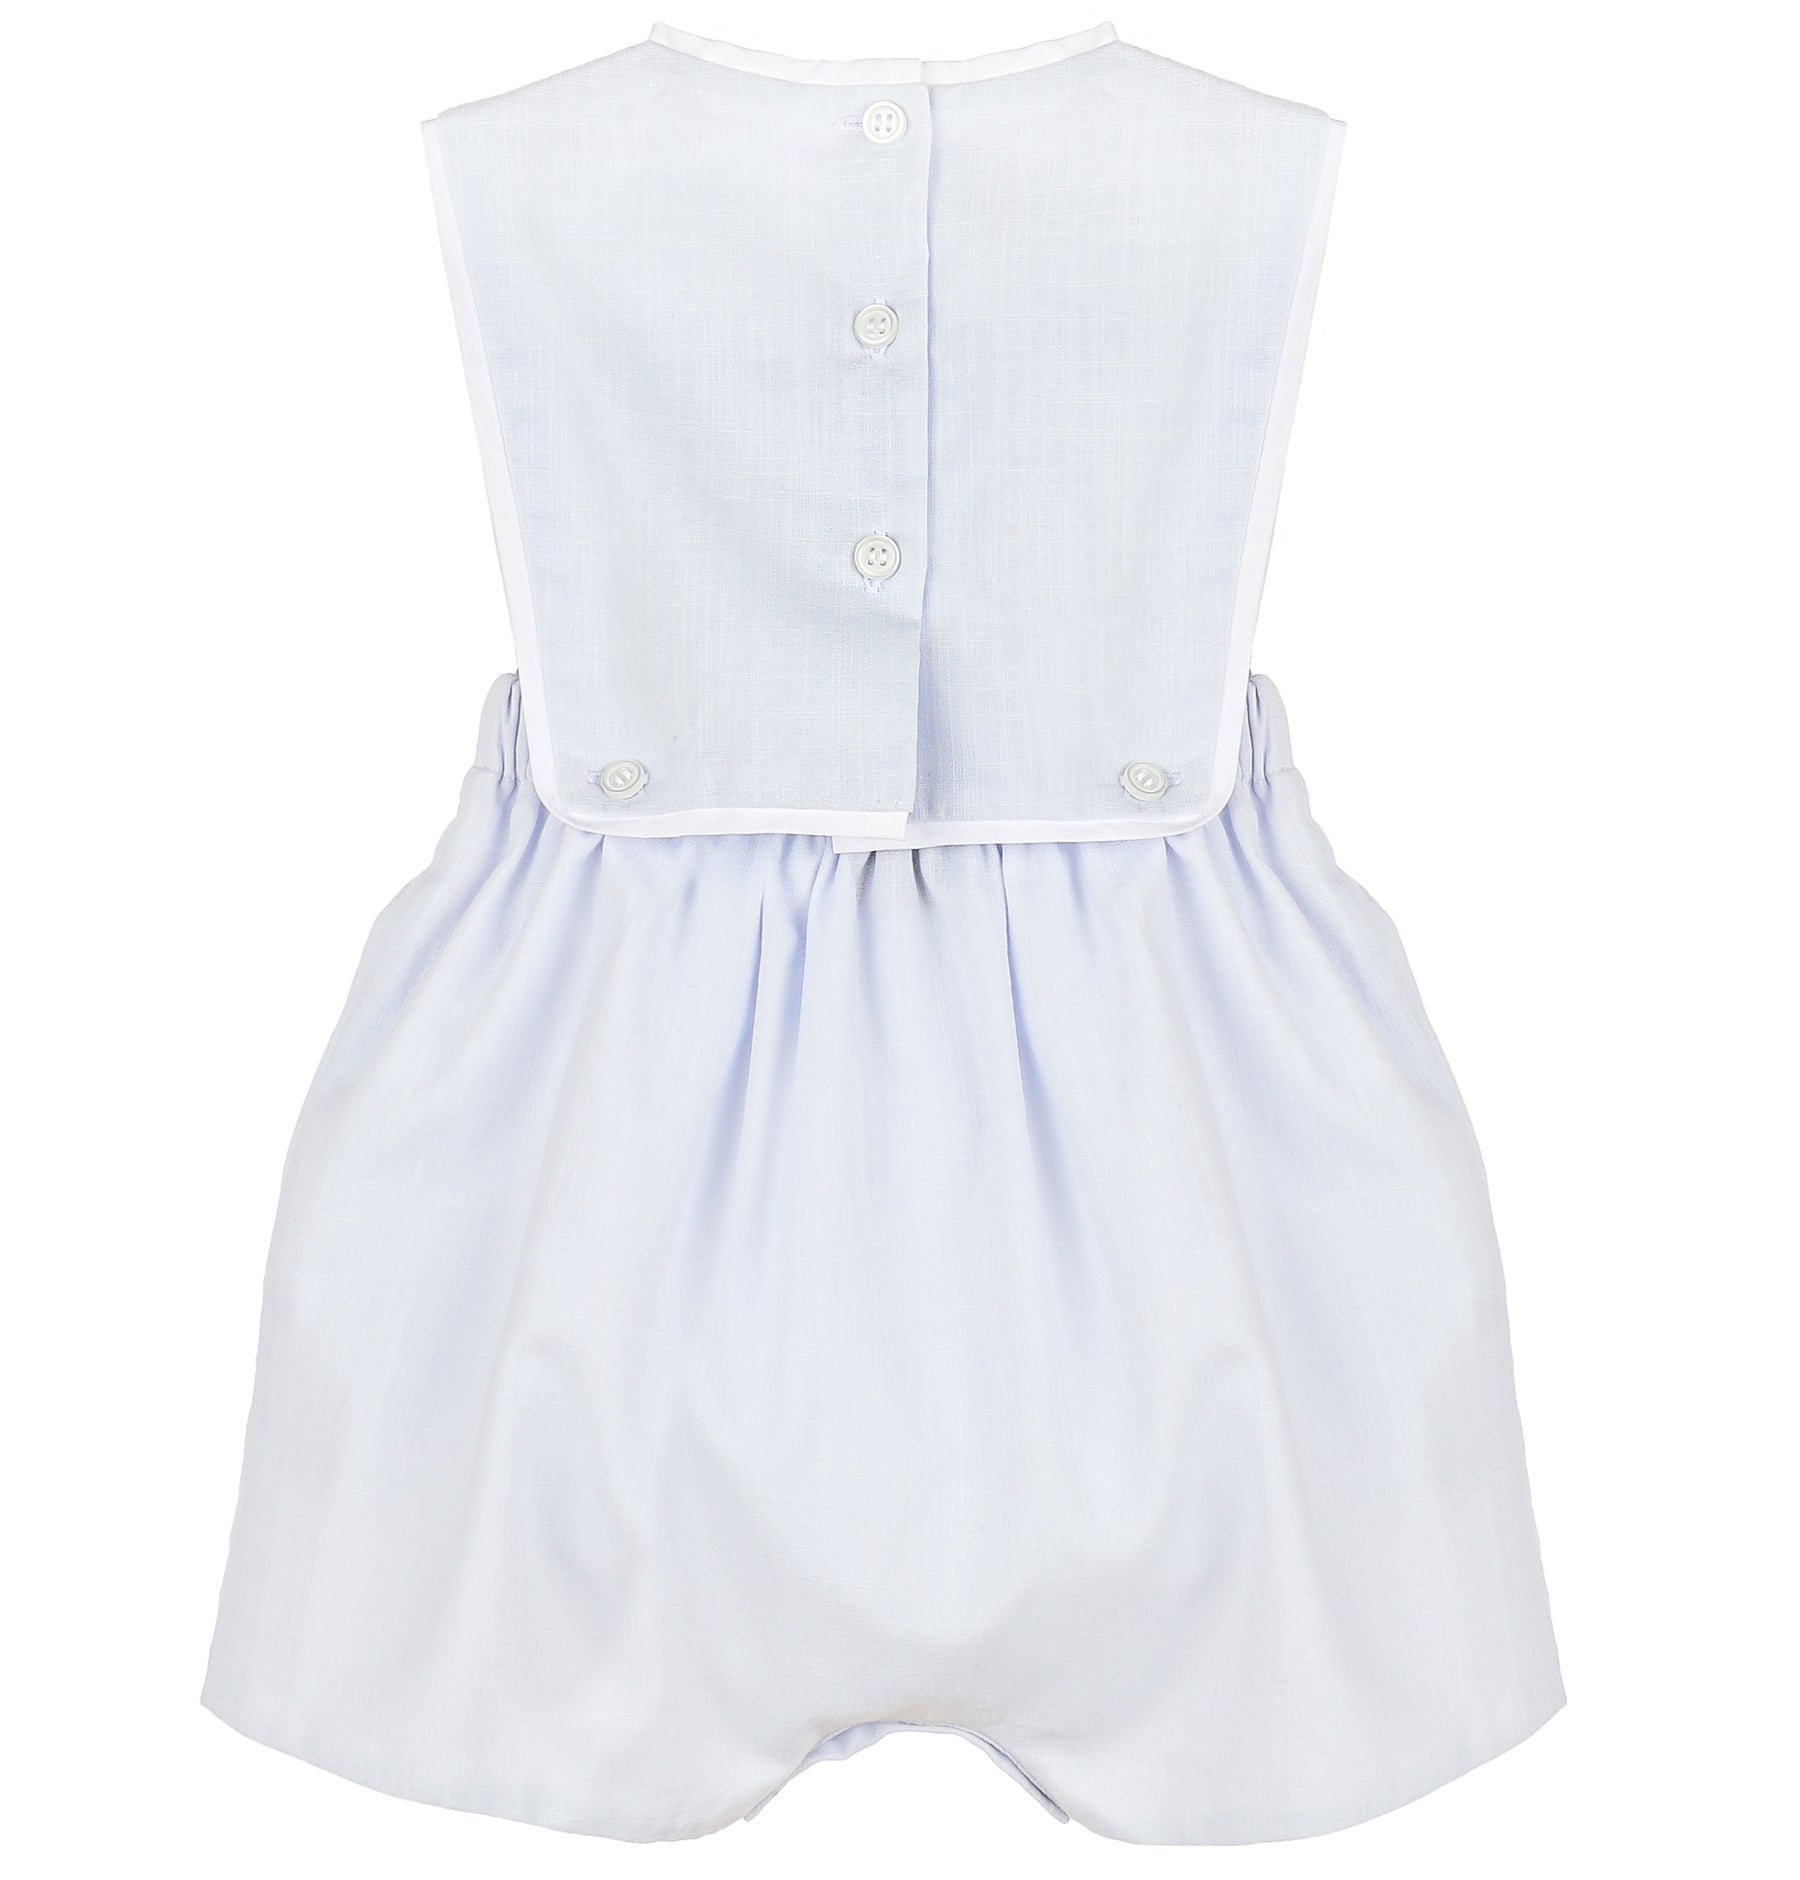 Blue Classic Boys Overall